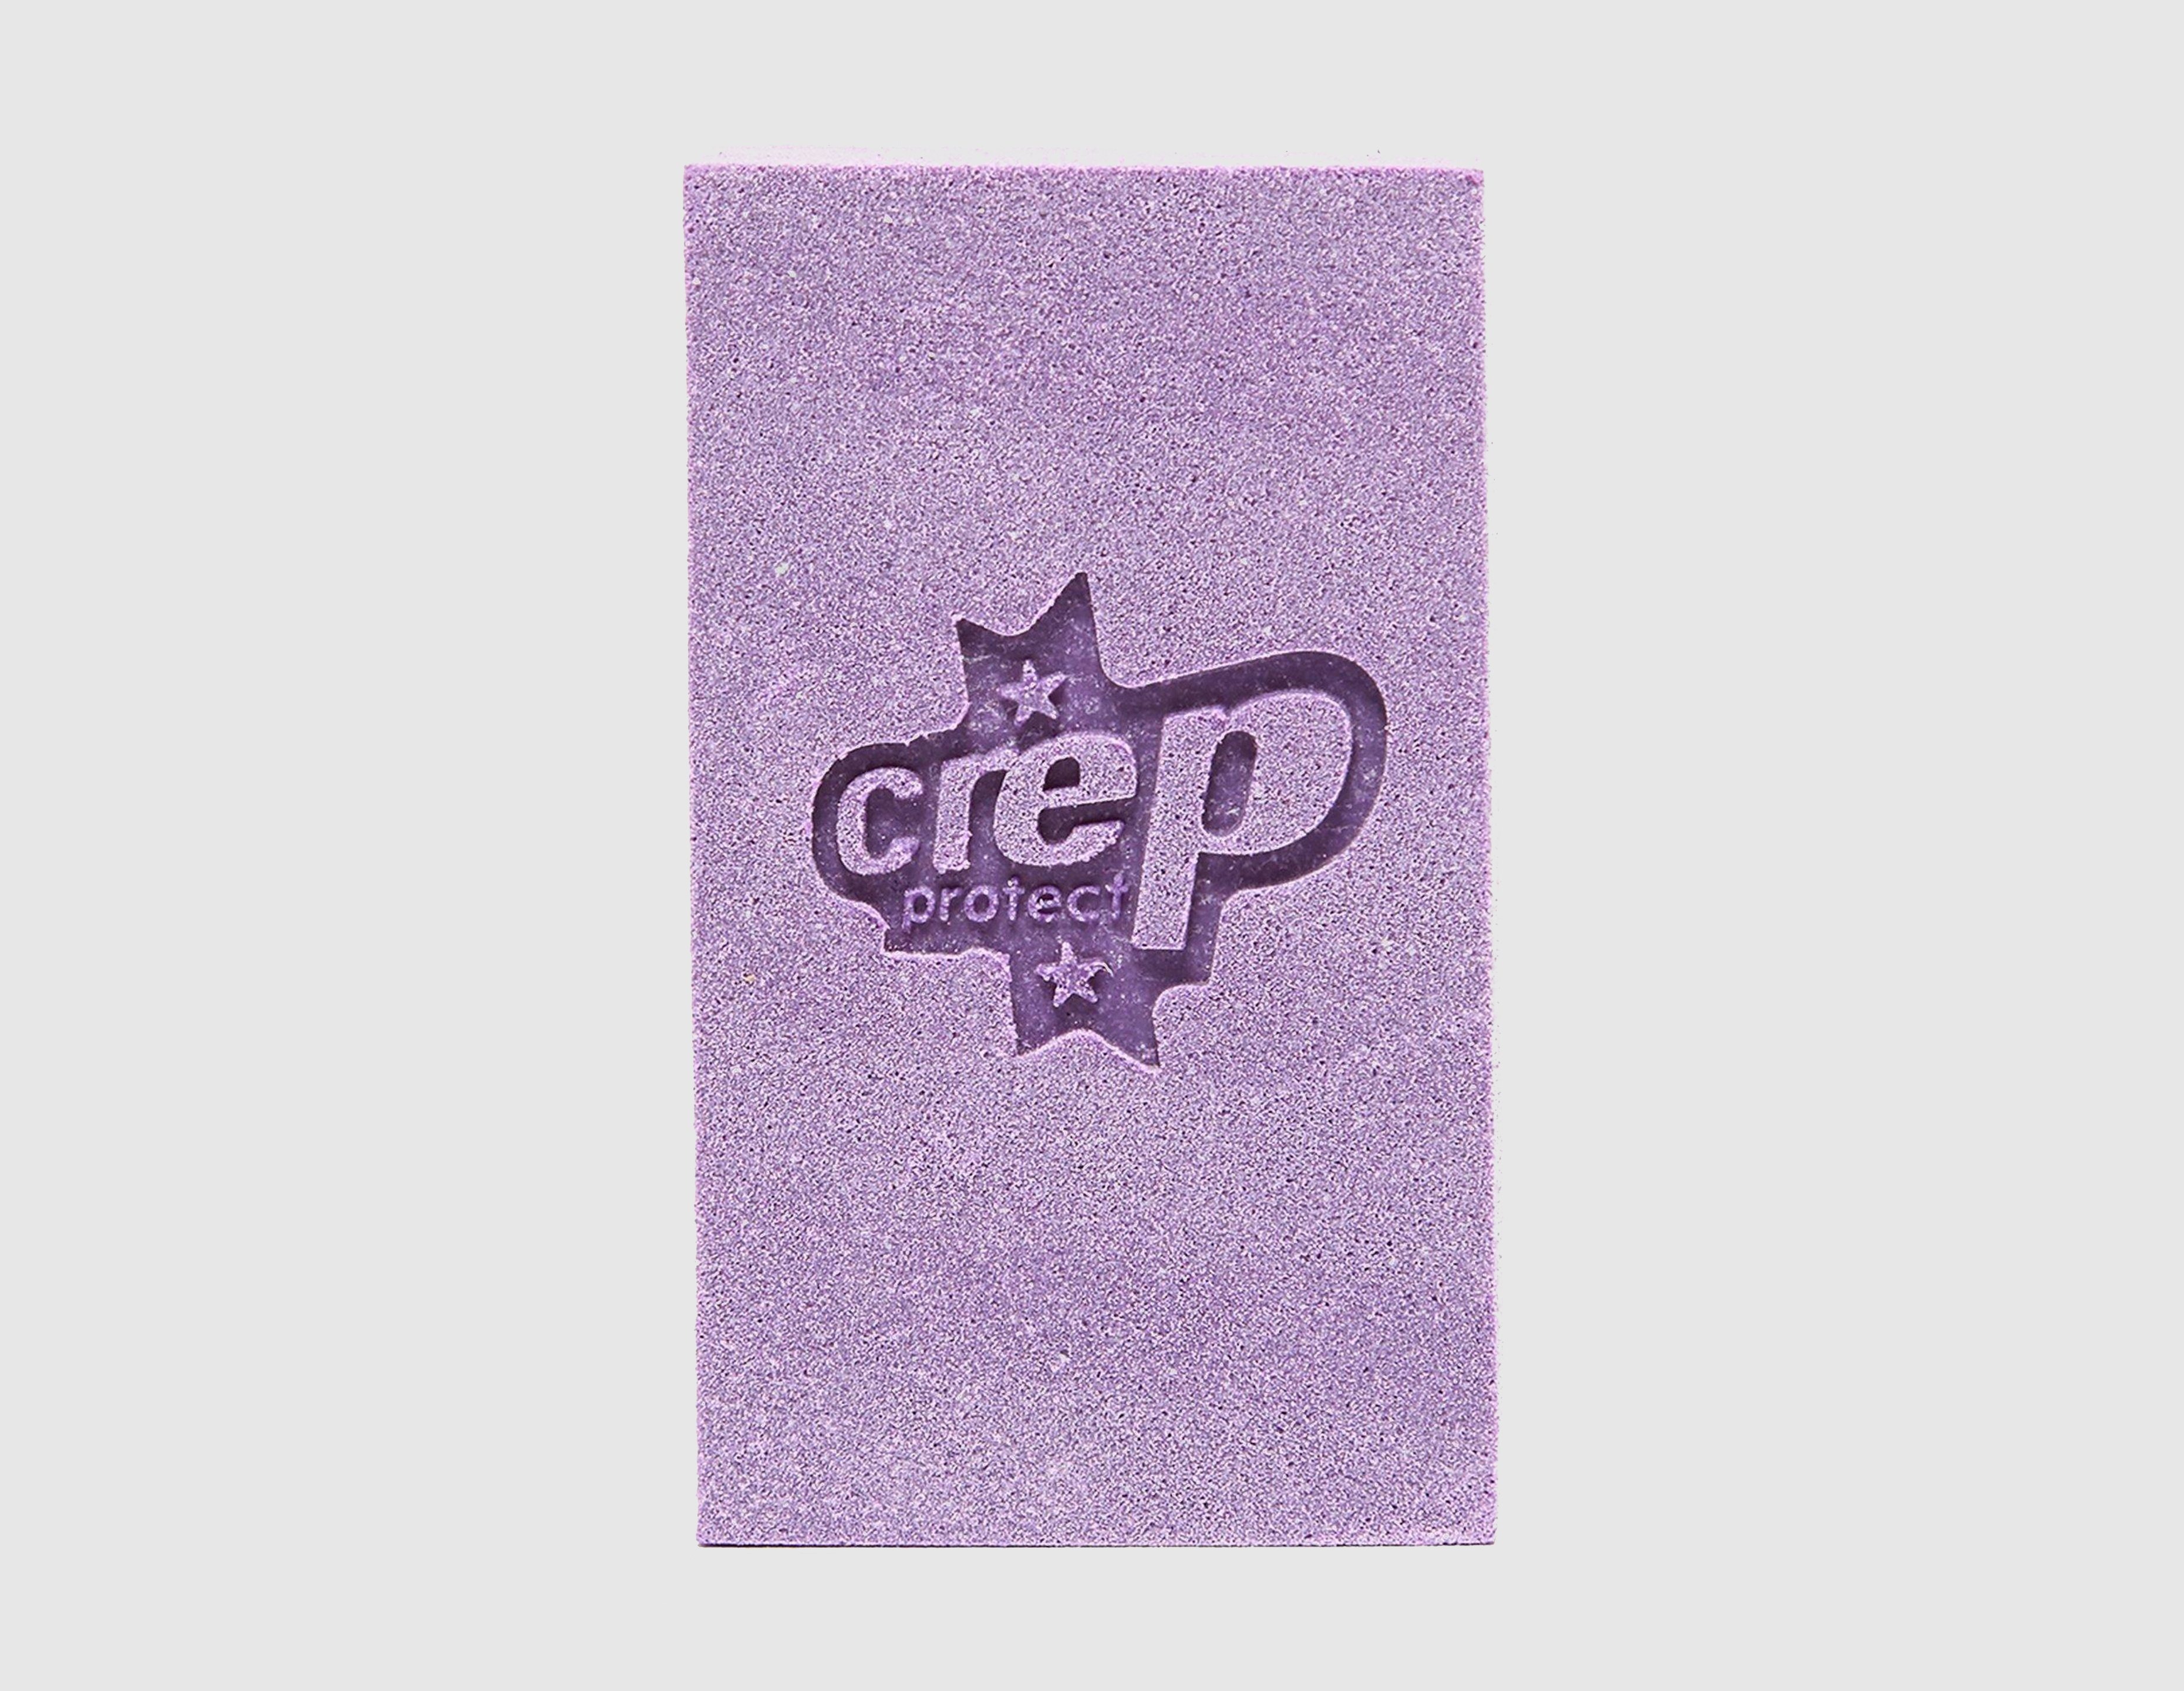 crep protect suede and nubuck eraser, n/a